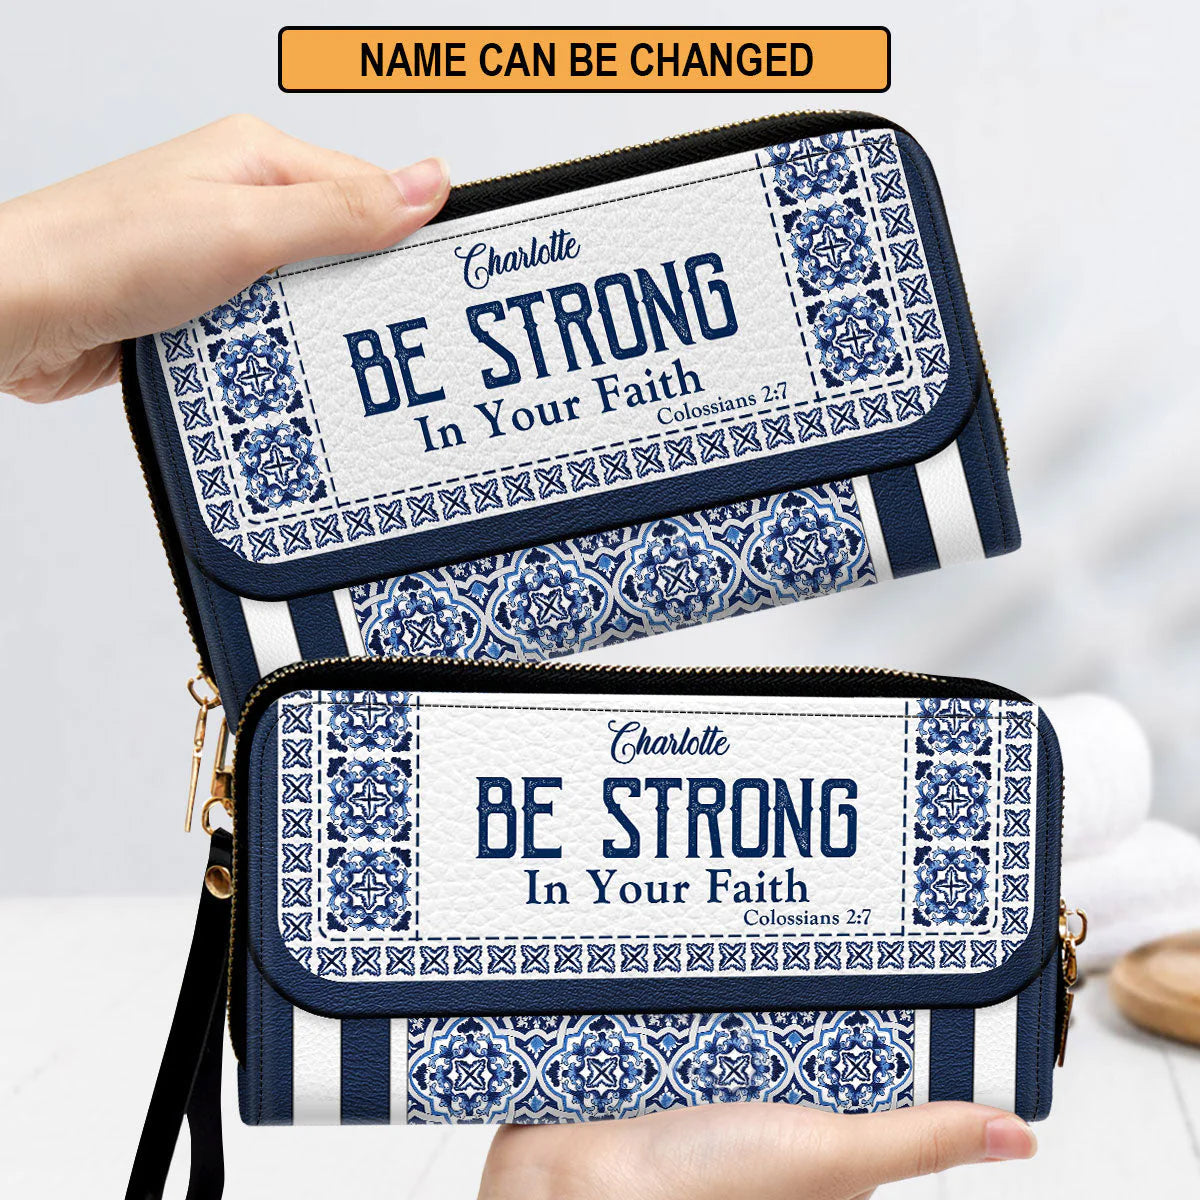 Christianartbag Handbag, Be Strong In Your Faith, Personalized Gifts, Gifts for Women, Christmas Gift. - Christian Art Bag